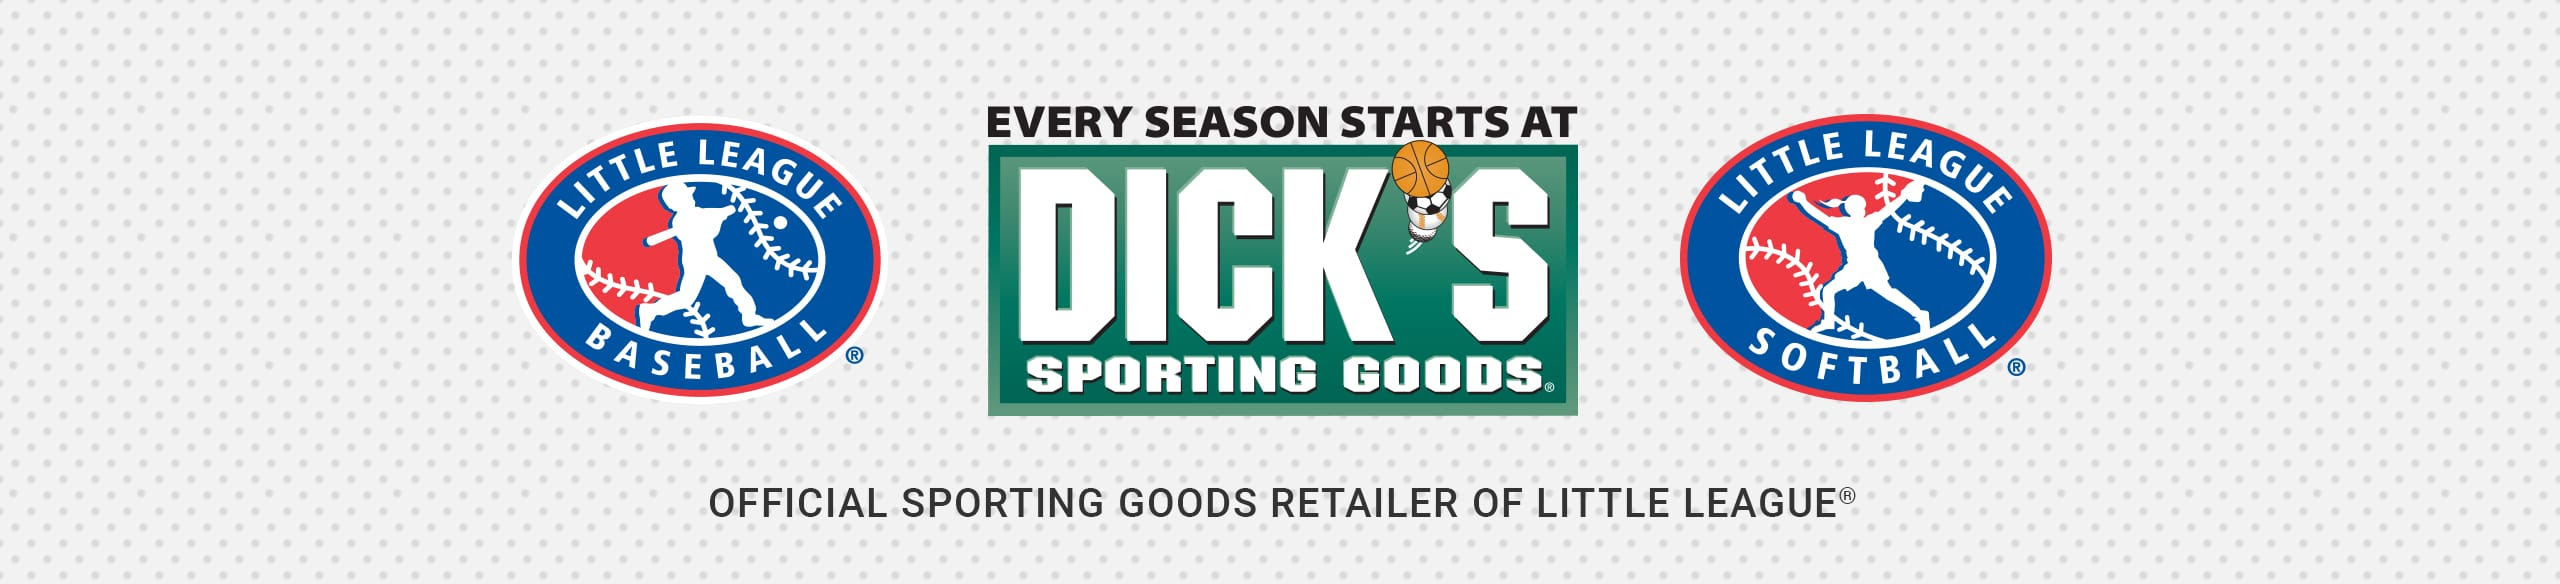 Dick's Sporting Goods. Official sporting goods retailer of Little League